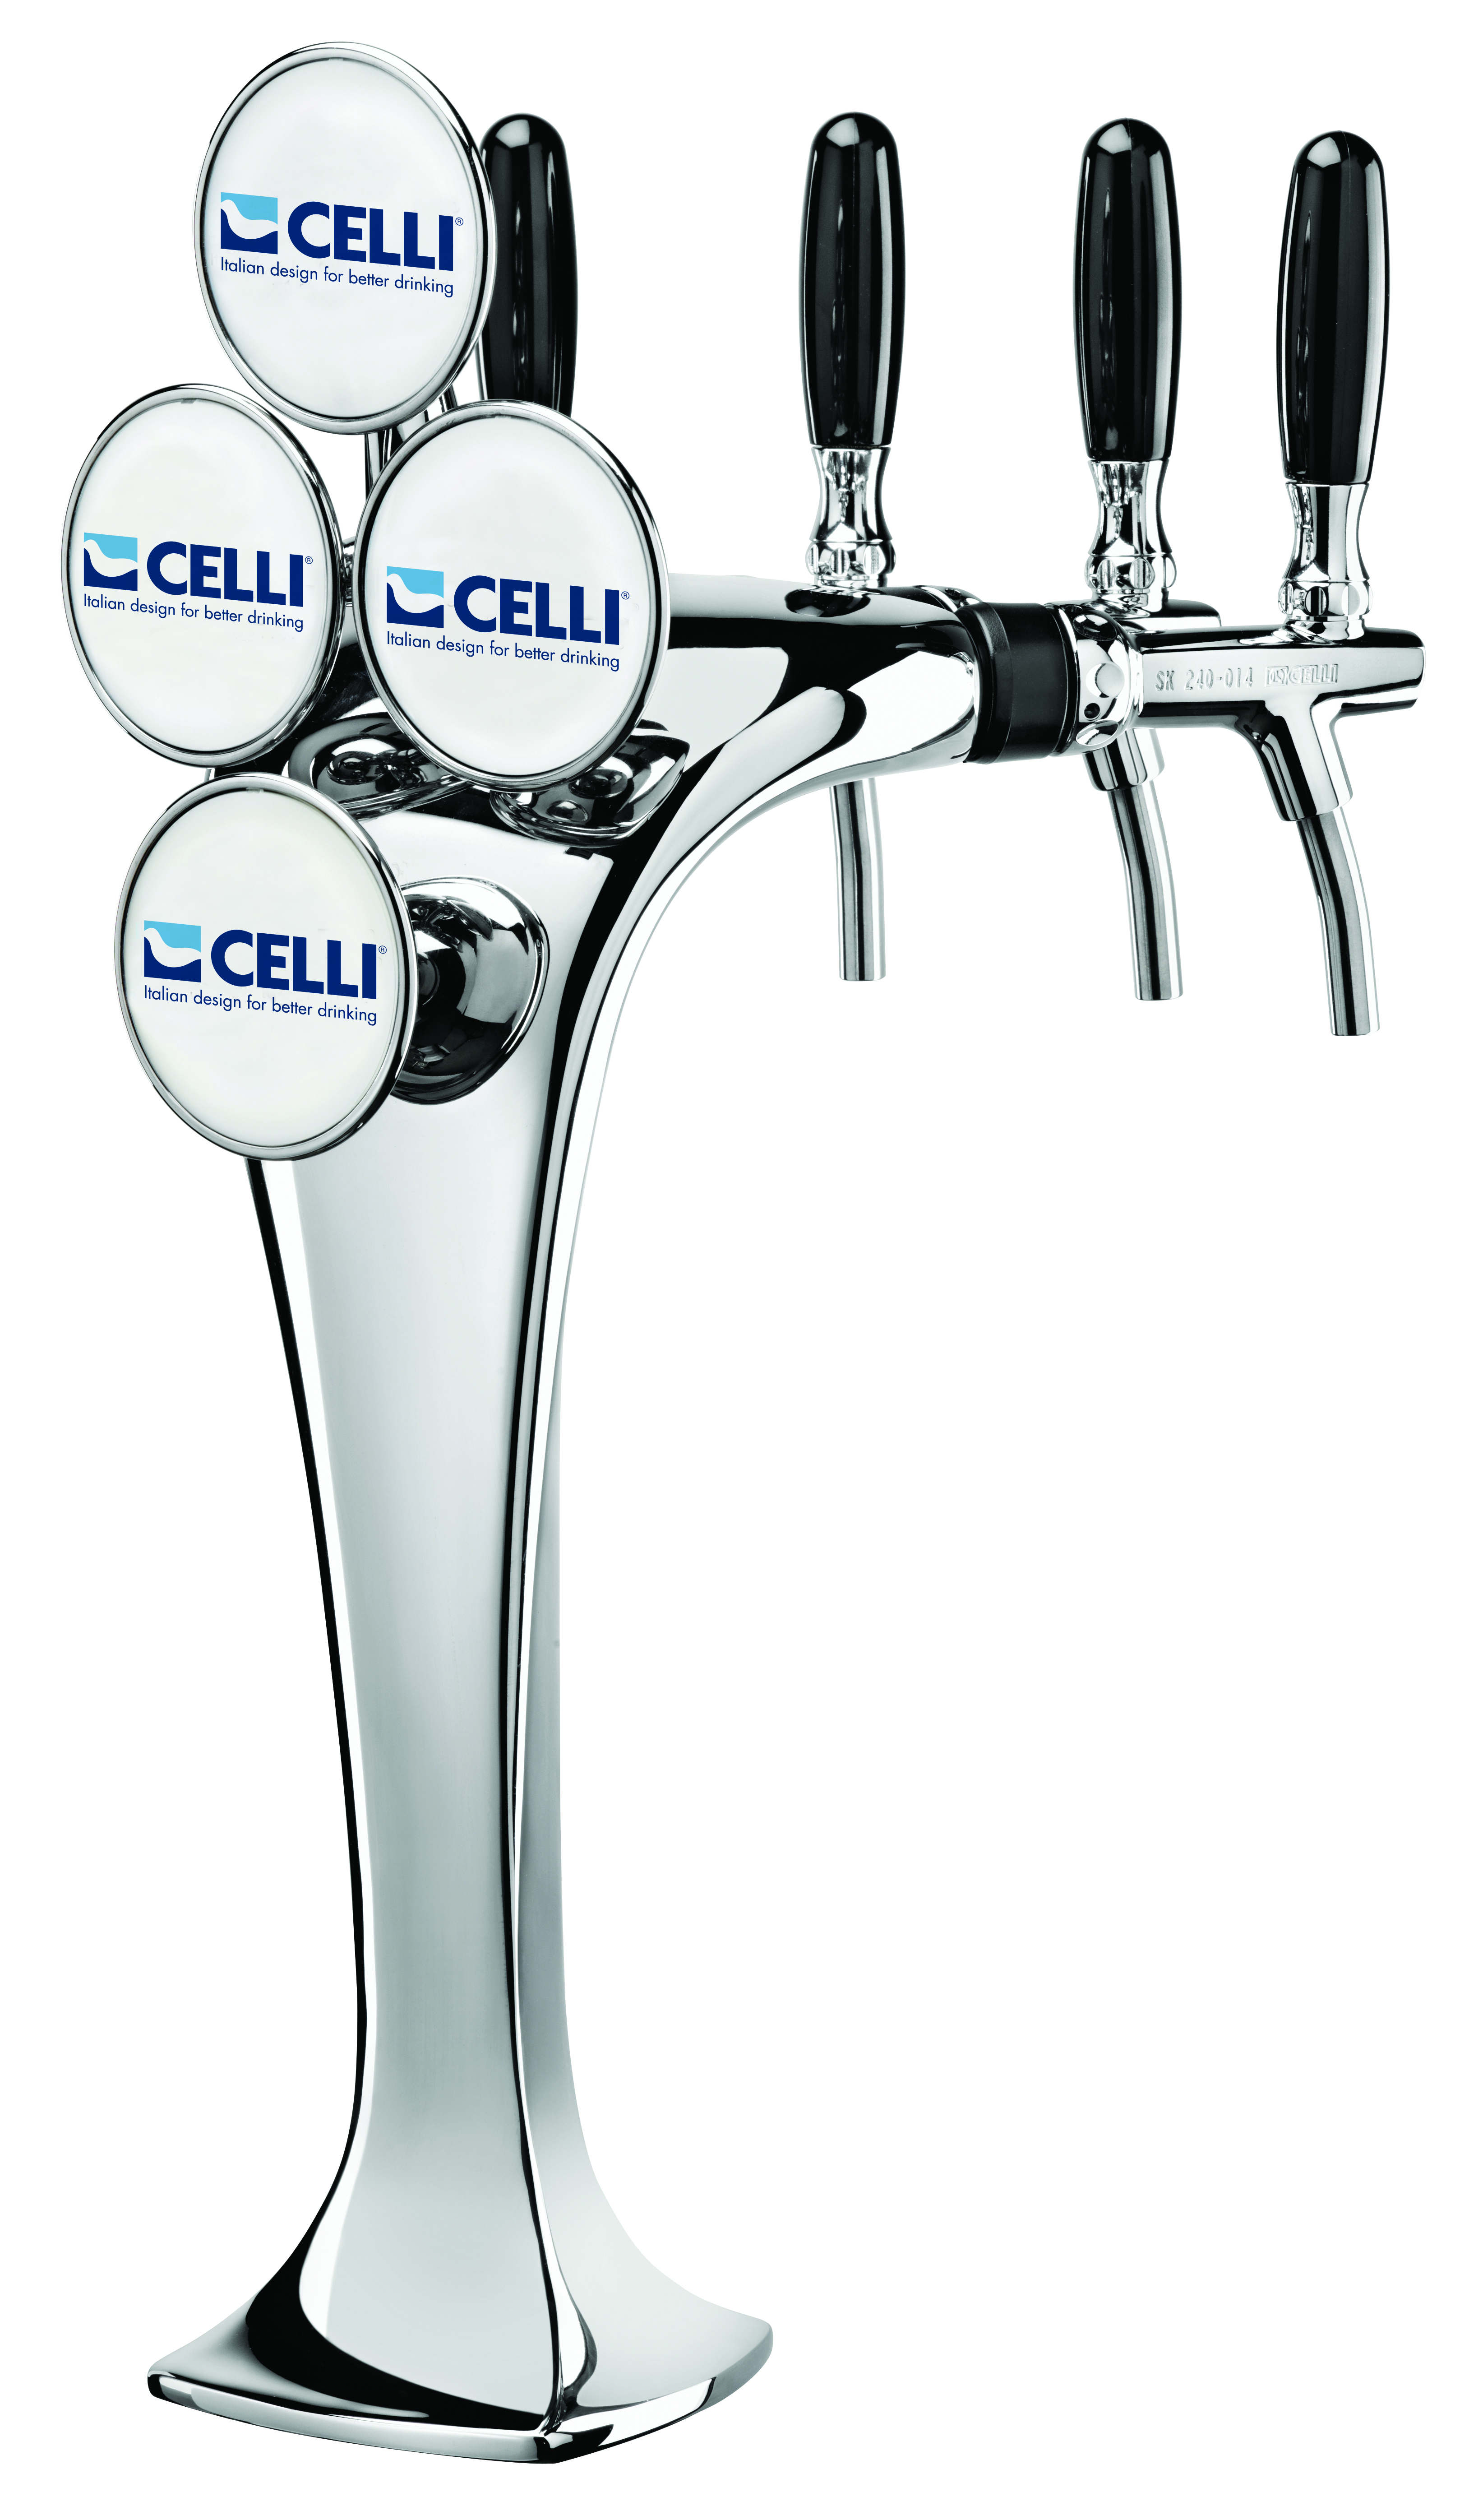 CELLI Cobra B4 - Four-way beer tower